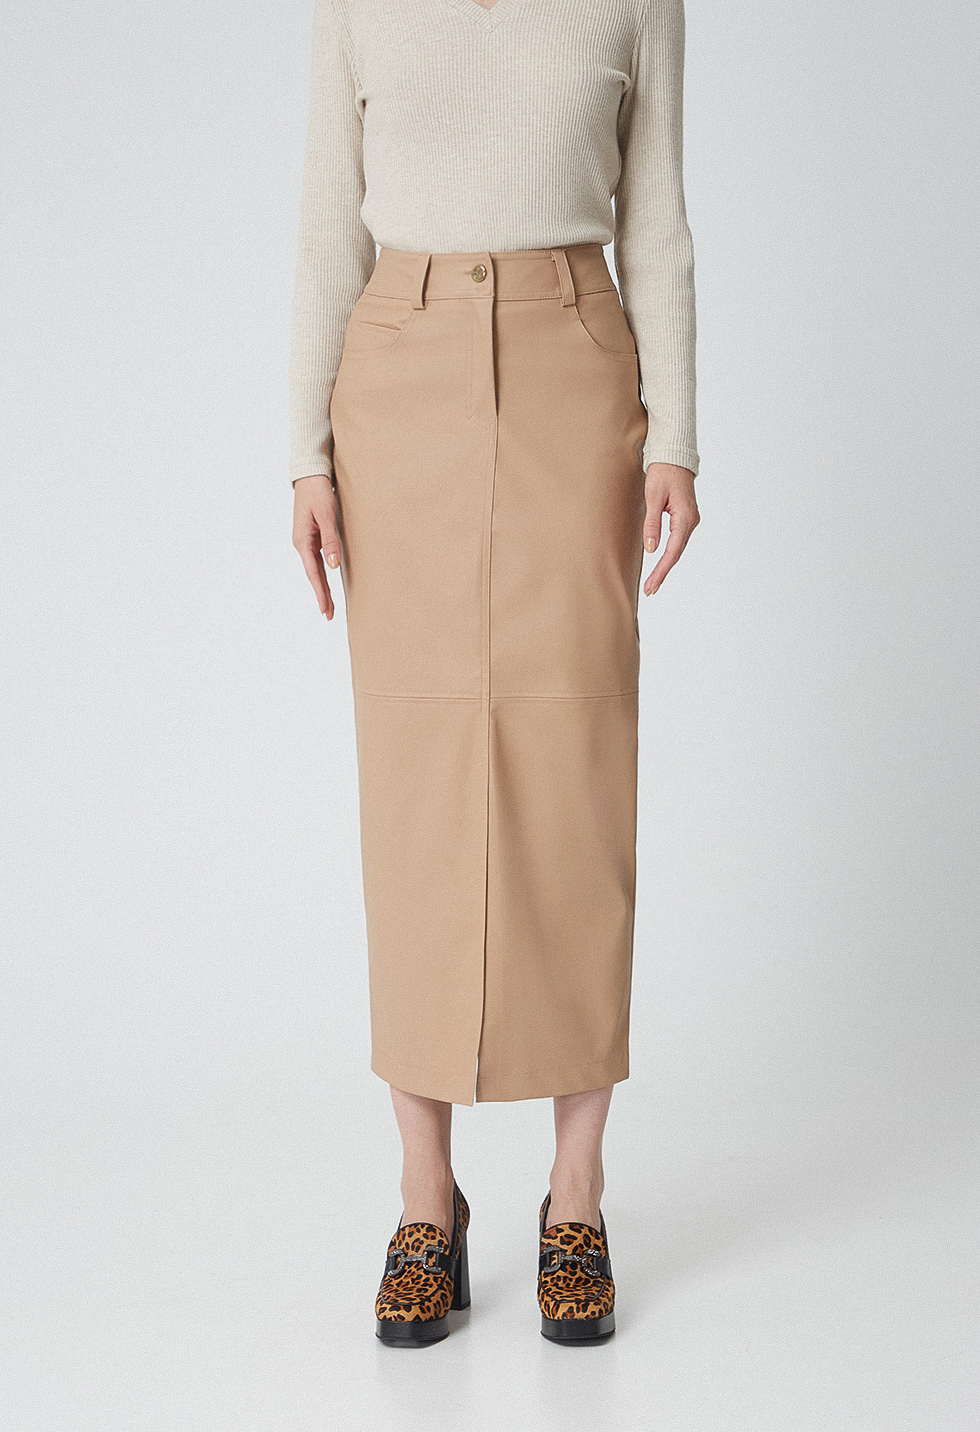 Fitted skirt with leather effect